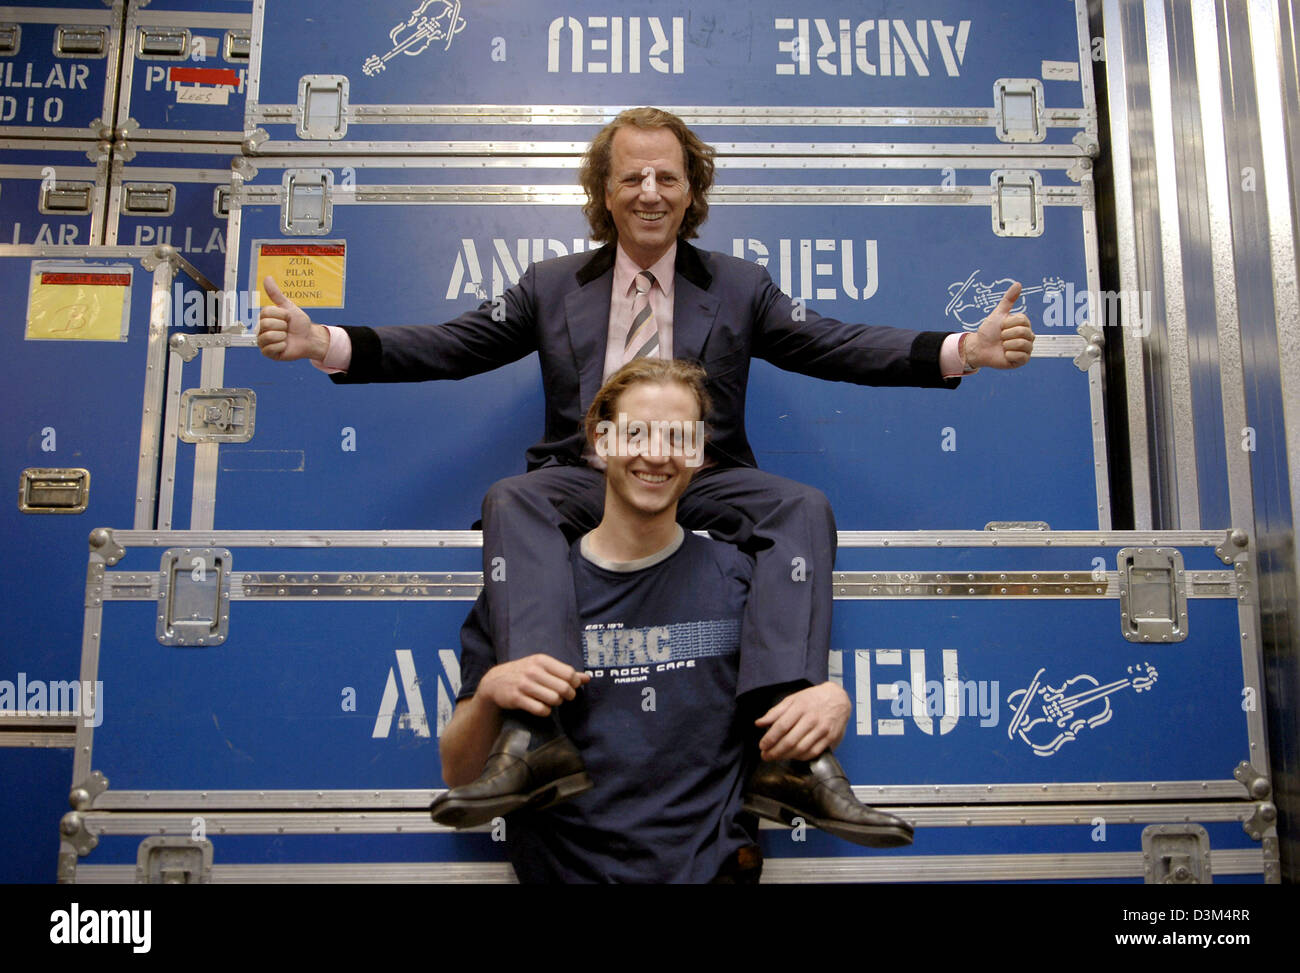 (dpa) - Dutch star violinist Andre Rieu (top) and his son Pierre (24) pose in front of large containers featuring Andre Rieu's name at his warehouse in Maastricht, the Netherlands, 02 November 2005. The 56-year-old musician is about to start the first part of his tour through Canada and the USA, where he will perform at 13 mayor cities. The complete equipment of his crew, which num Stock Photo